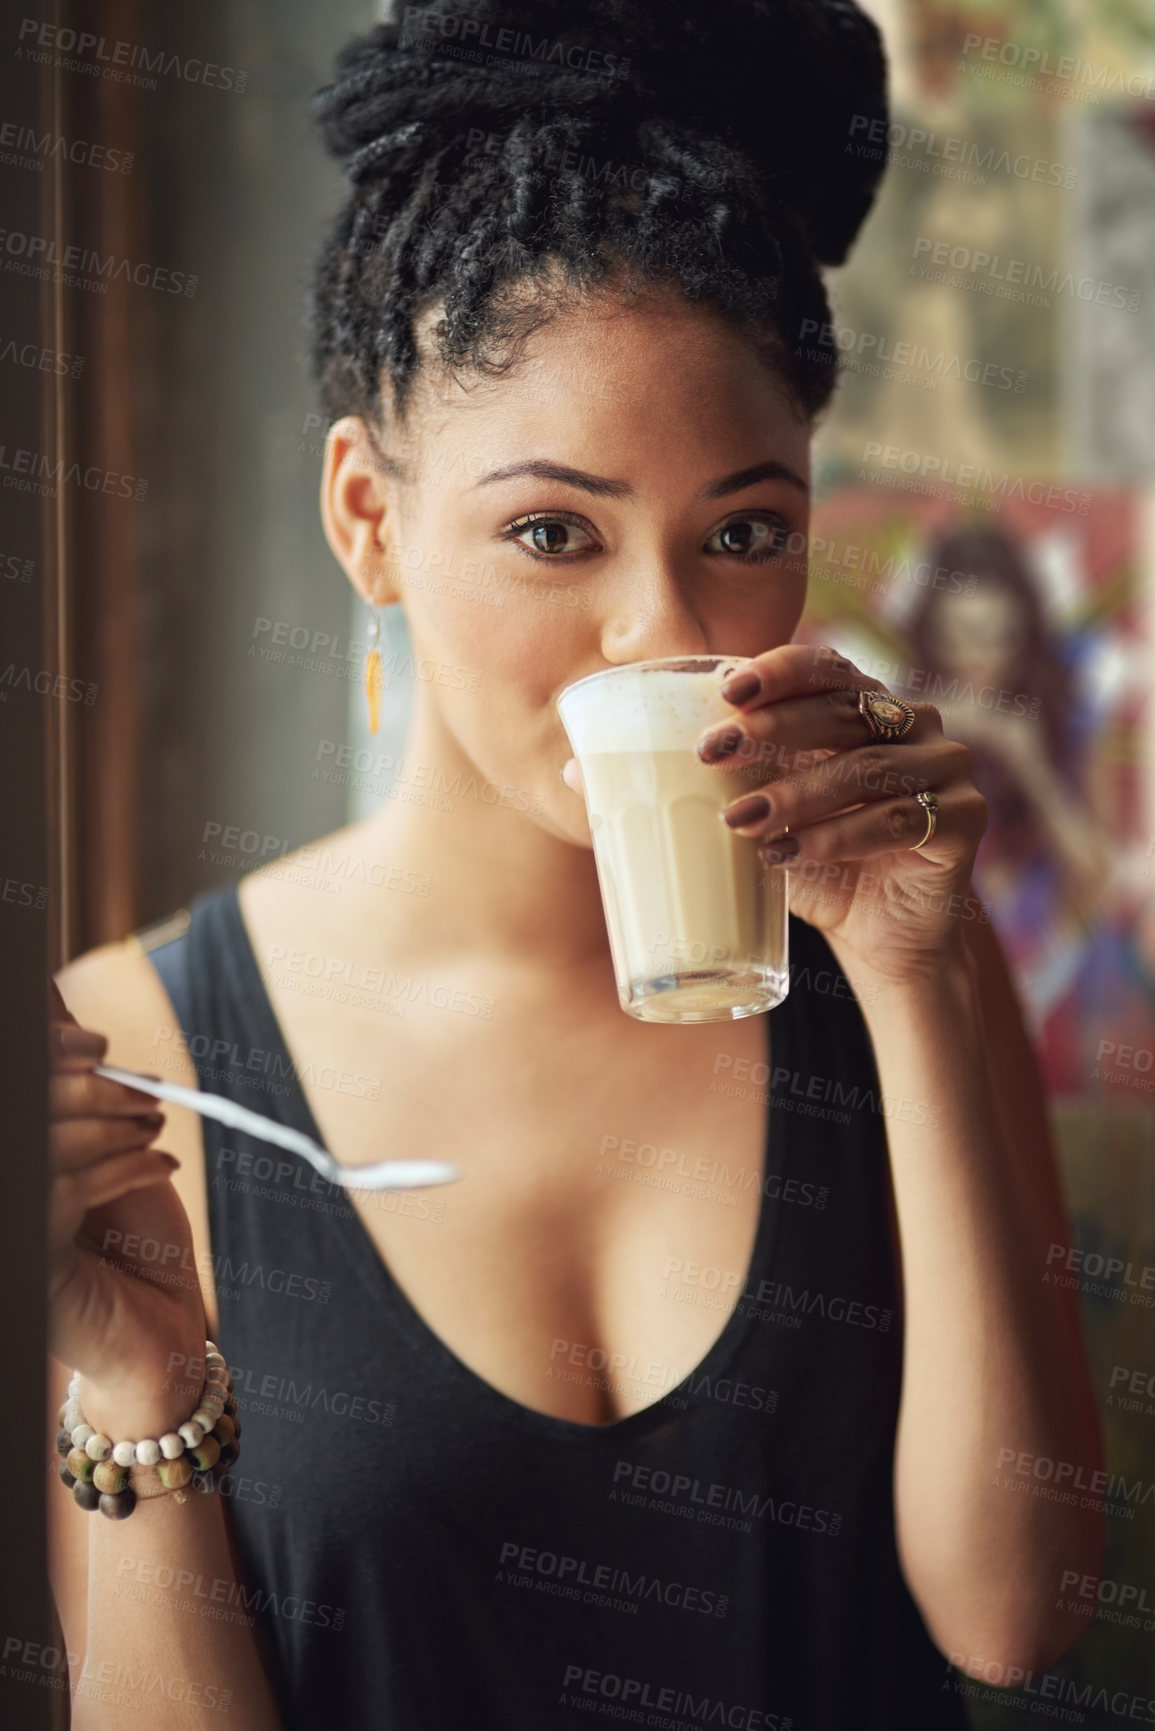 Buy stock photo Cropped portrait of an attractive young woman sitting in a coffee shop